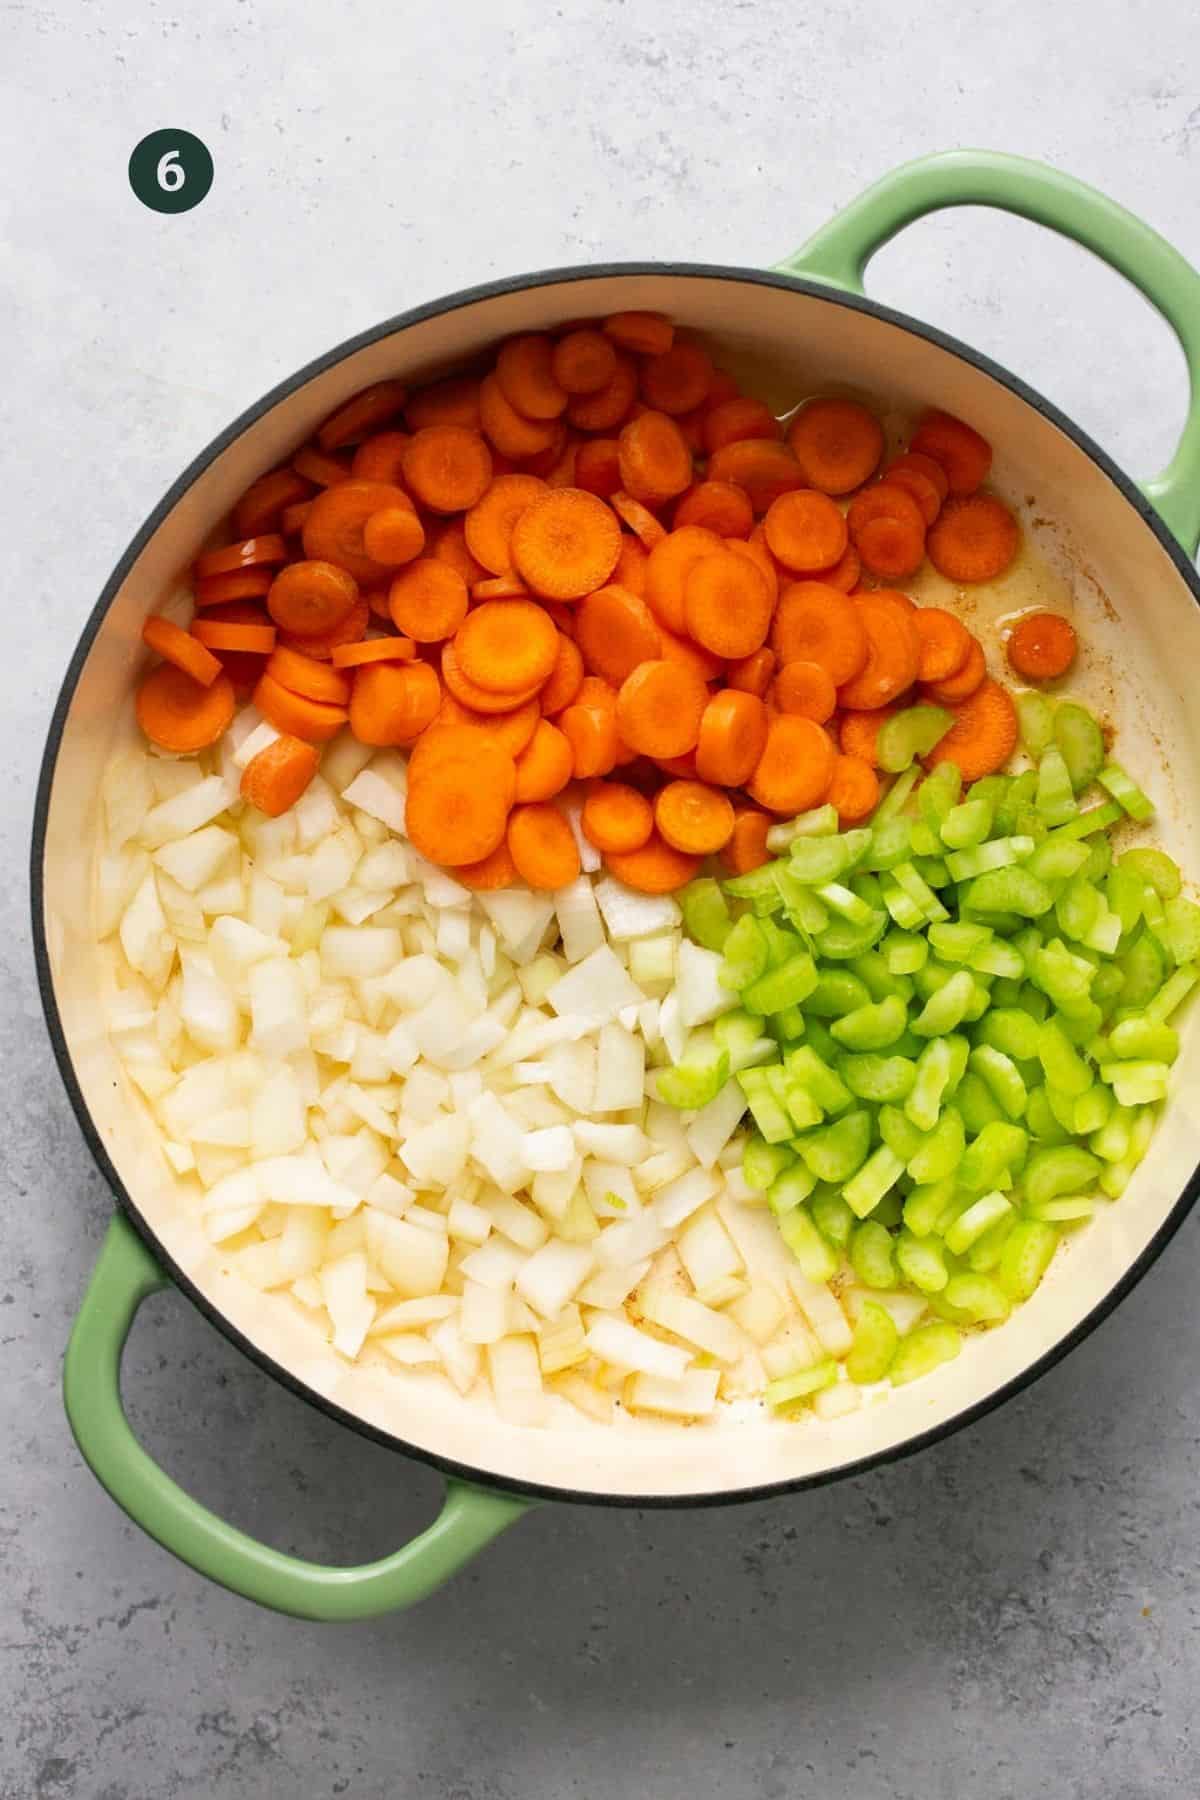 Carrots, celery and onions in a pan.